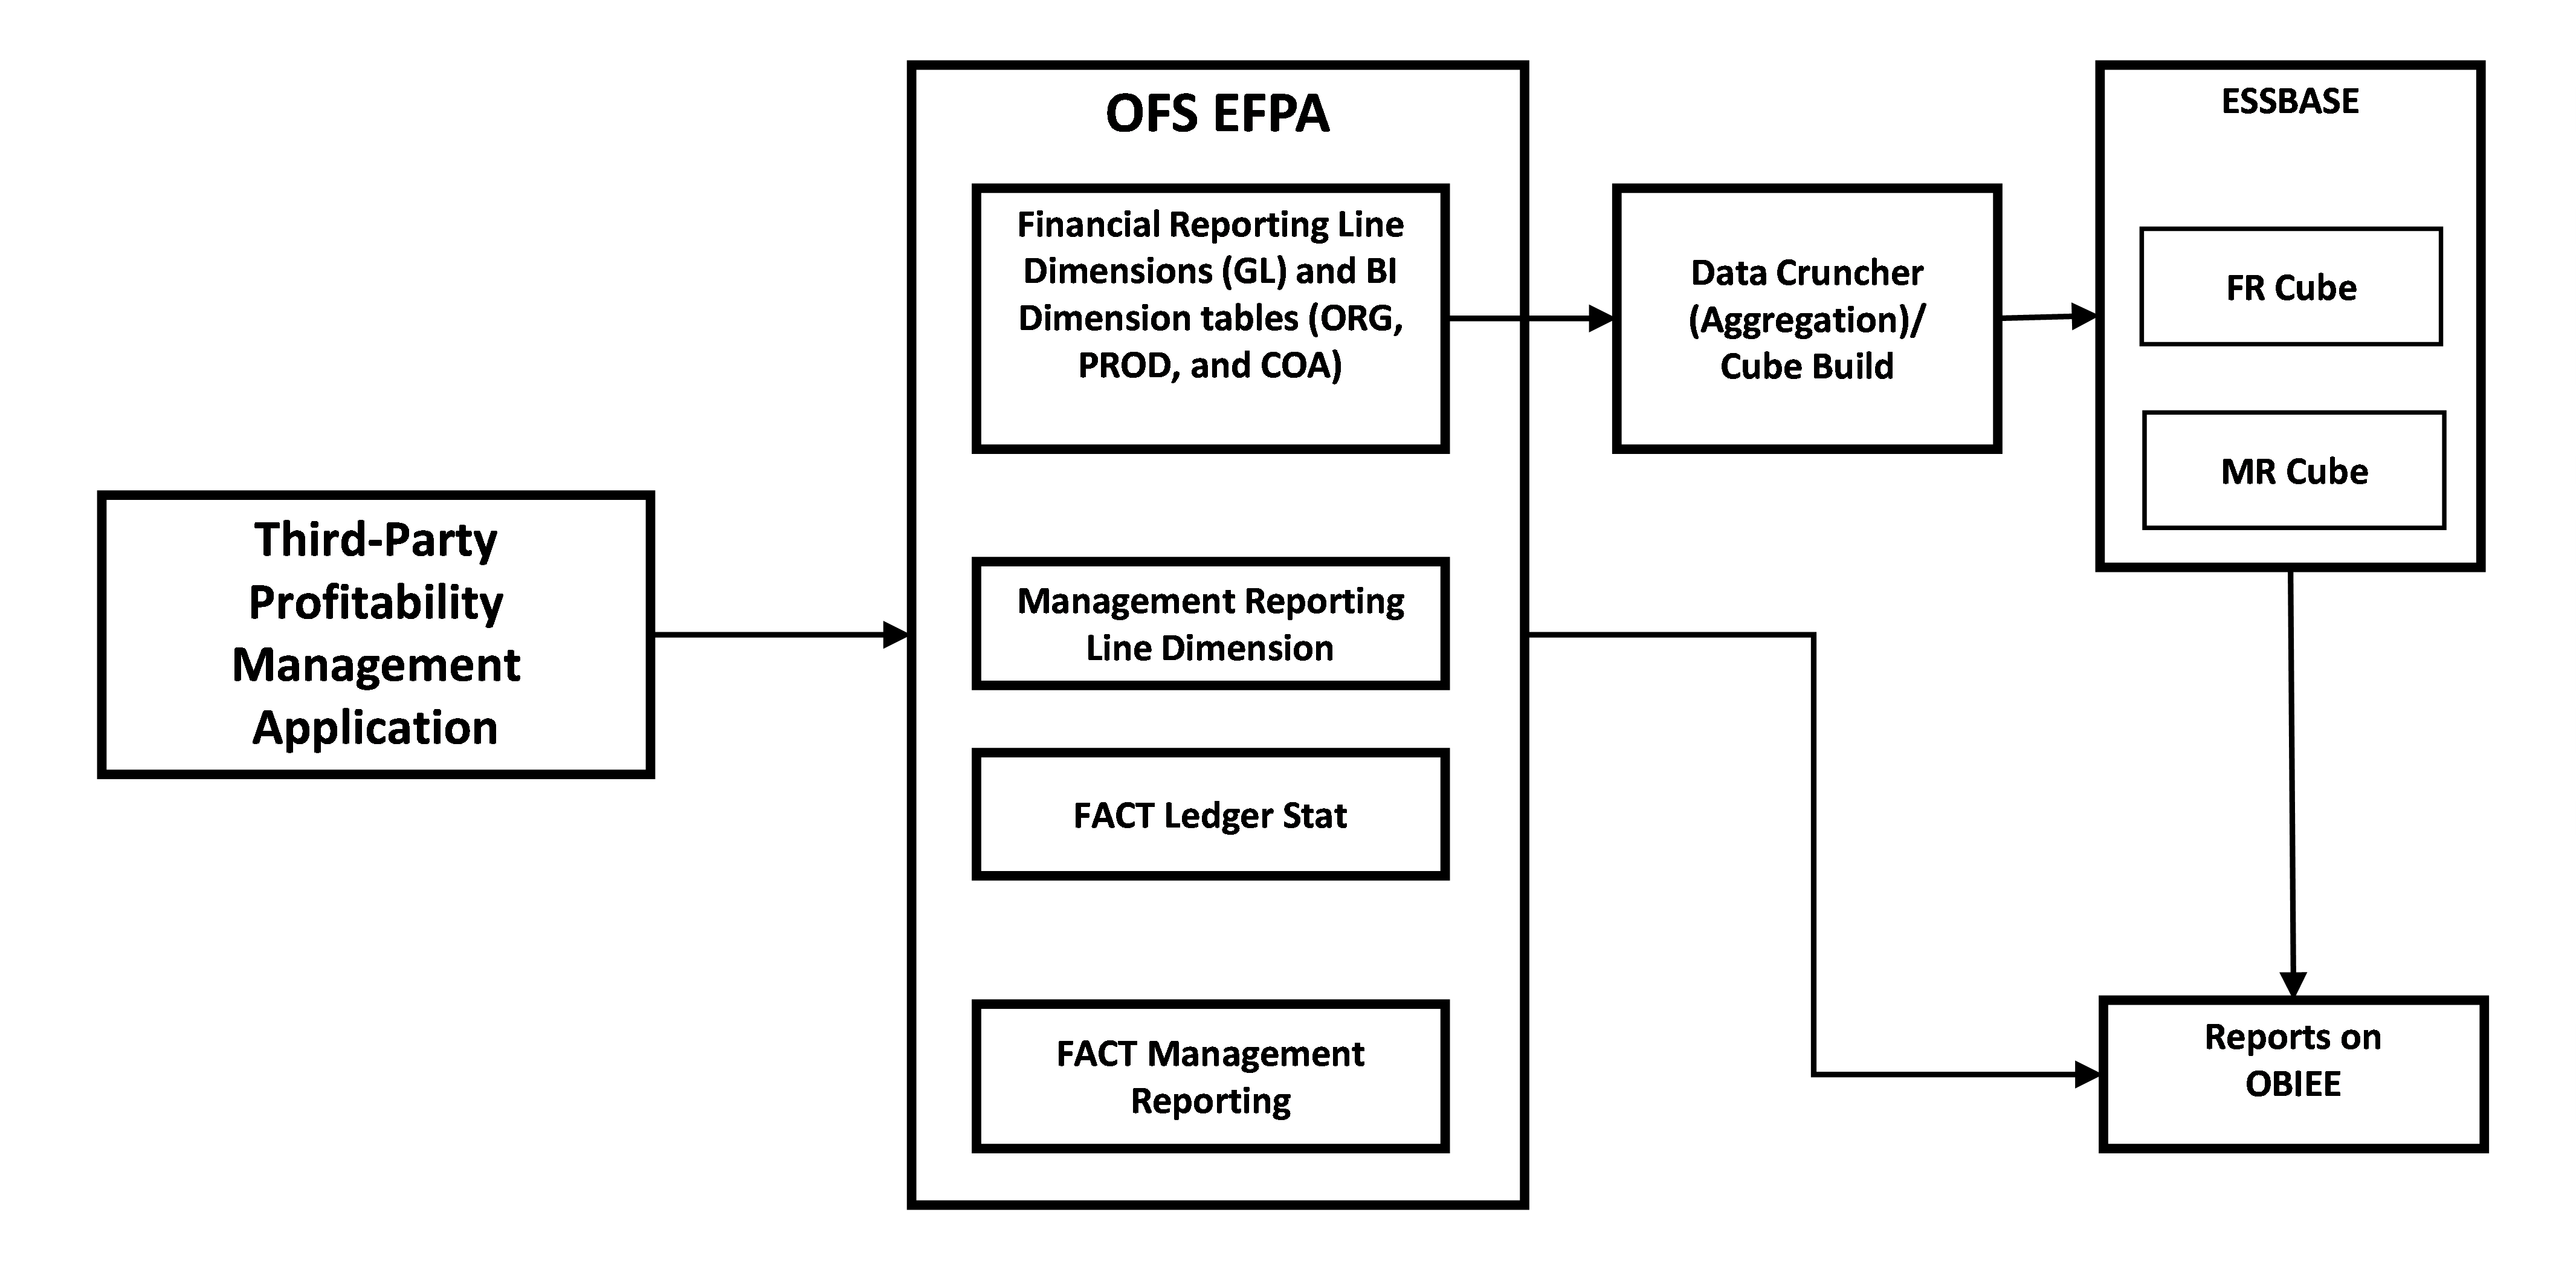 This illustration depicts the data flow between third-party profitability management applications and EFPA reporting area.